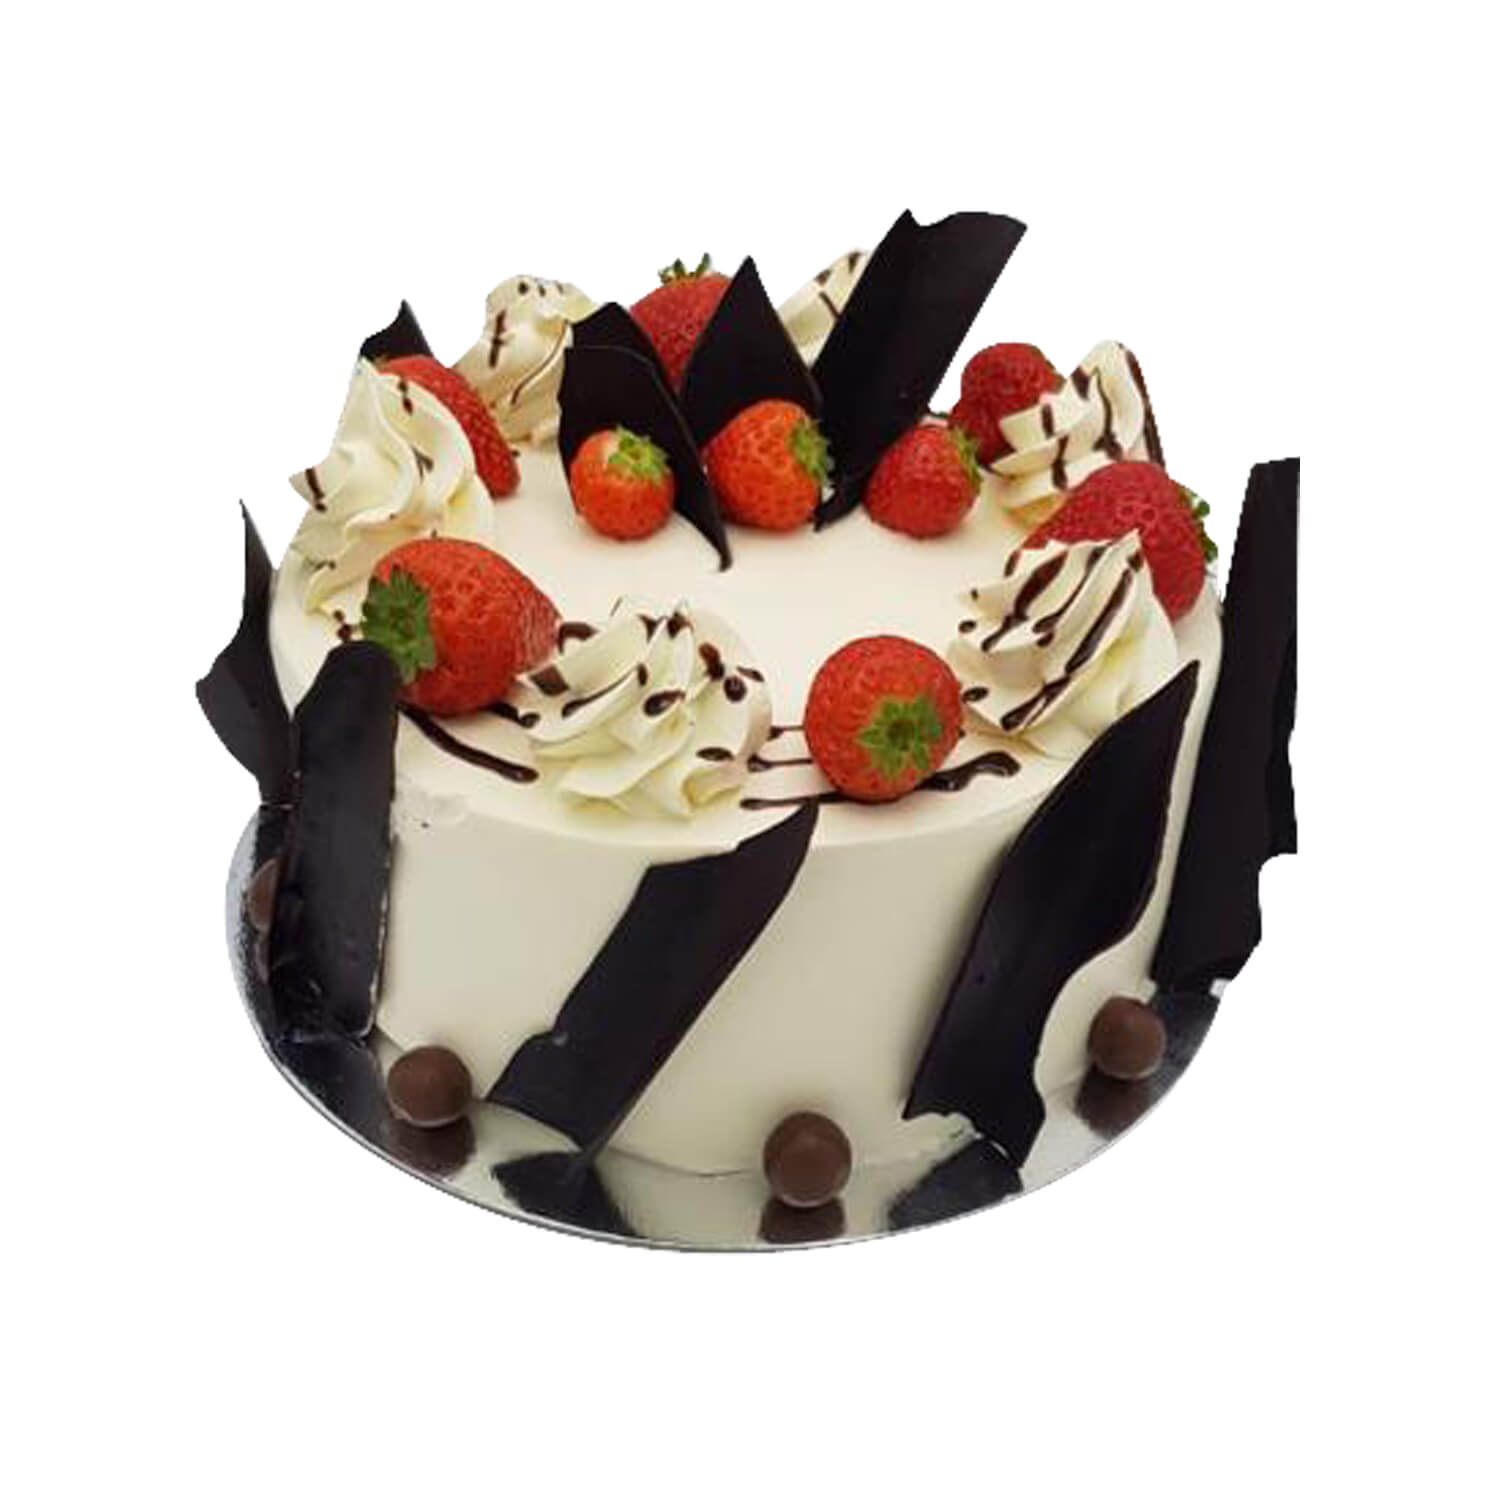 Buy Online Strawberry Flake Cake To Make Someone's Day More Special |  Winni.in